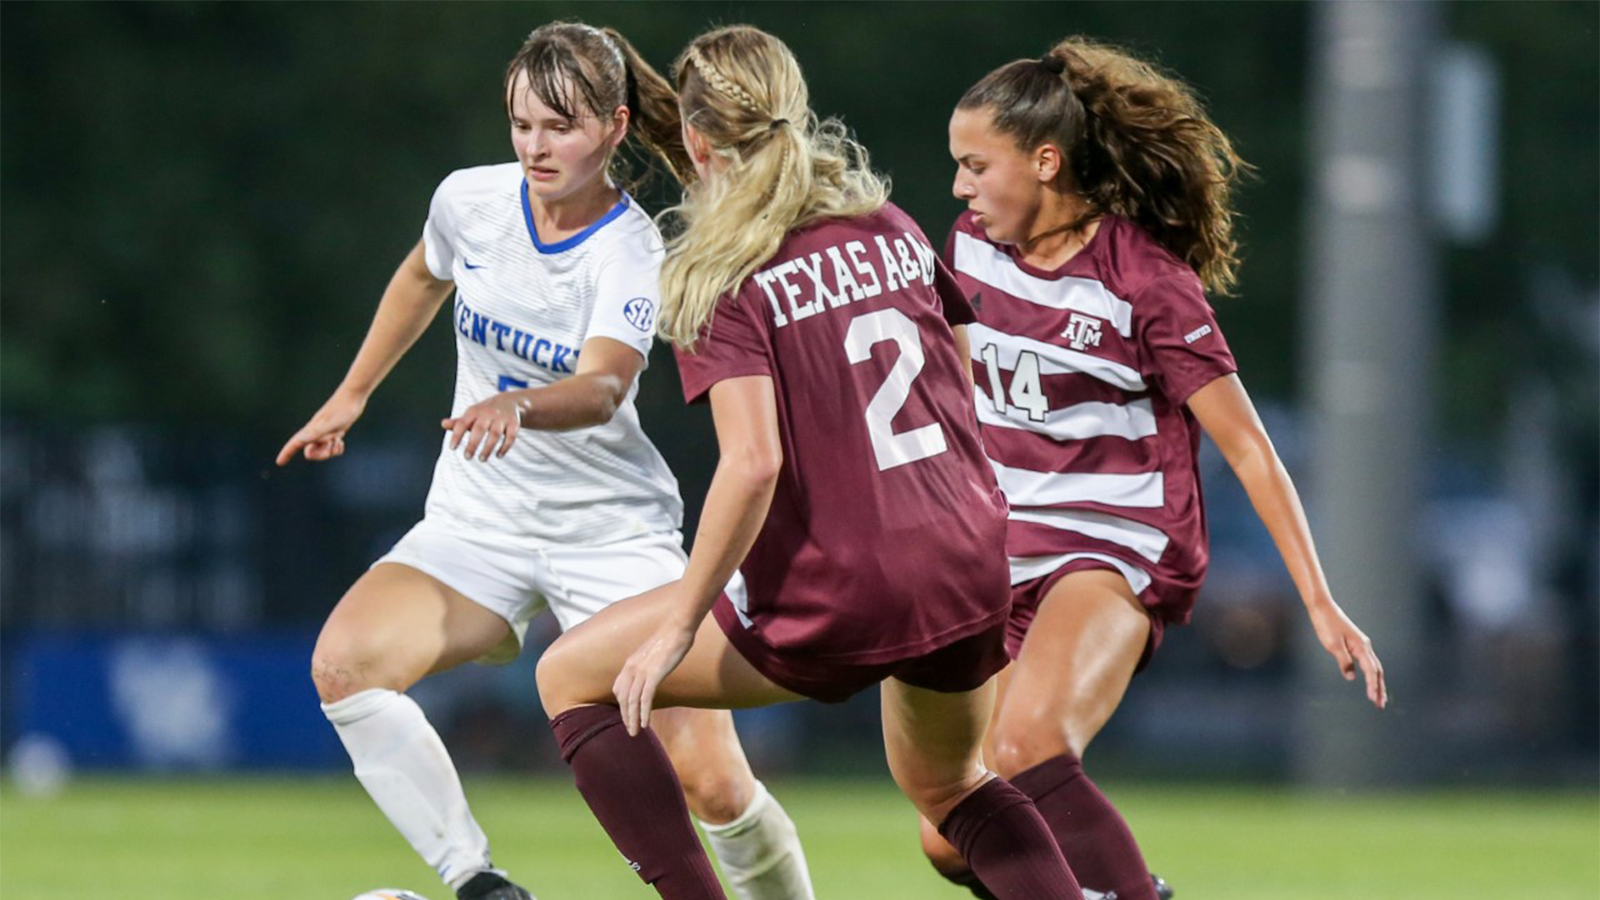 Kentucky Drops Conference Opener to Texas A&M, 3-0